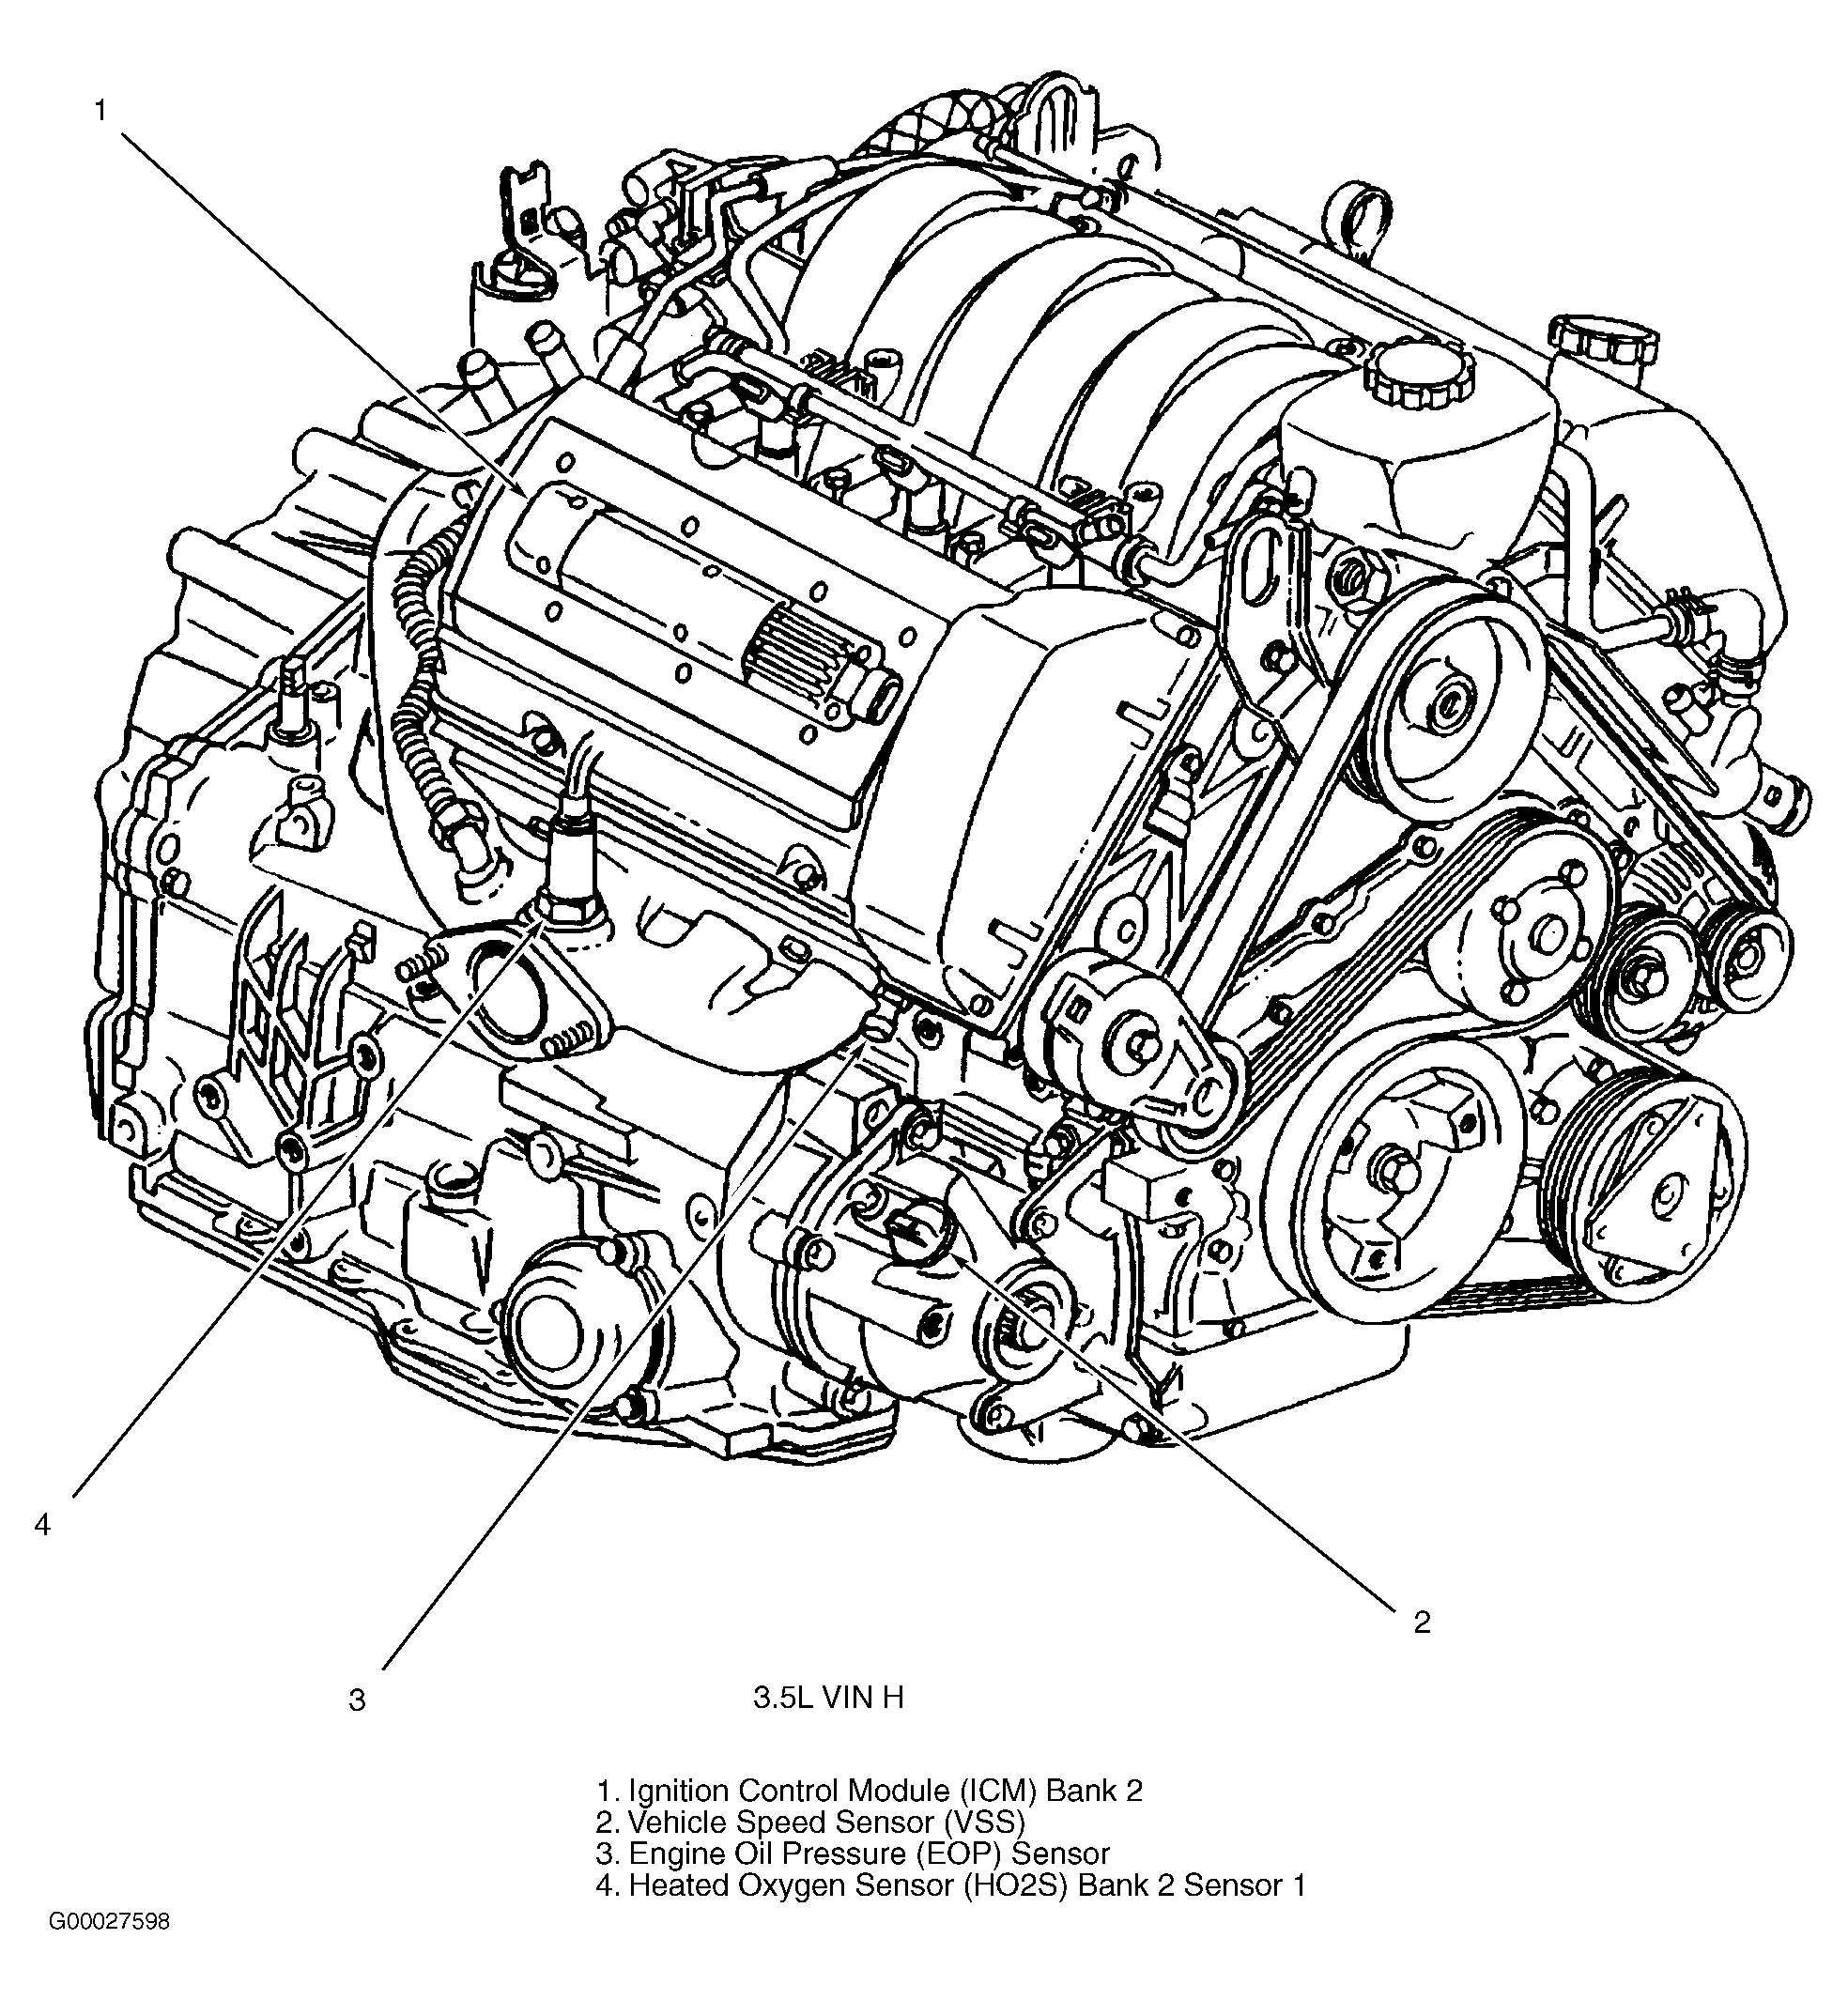 2002 Oldsmobile Intrigue Wiring Diagram from www.2carpros.com